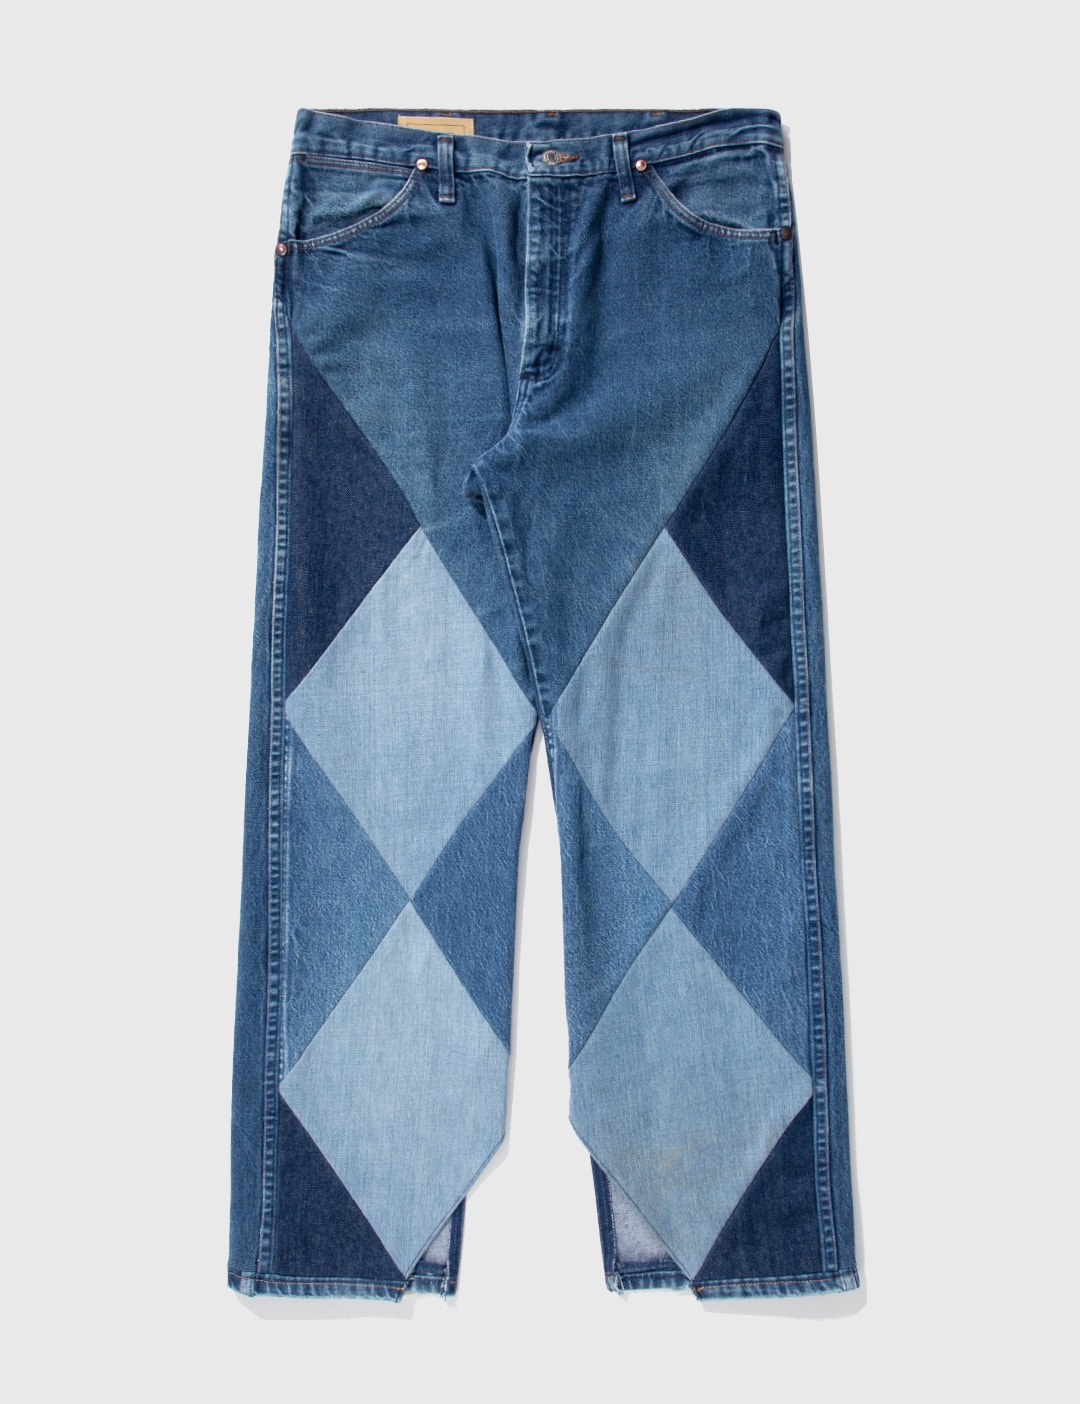 Seven by seven - Rework Denim Pants | HBX - Globally Curated Fashion ...